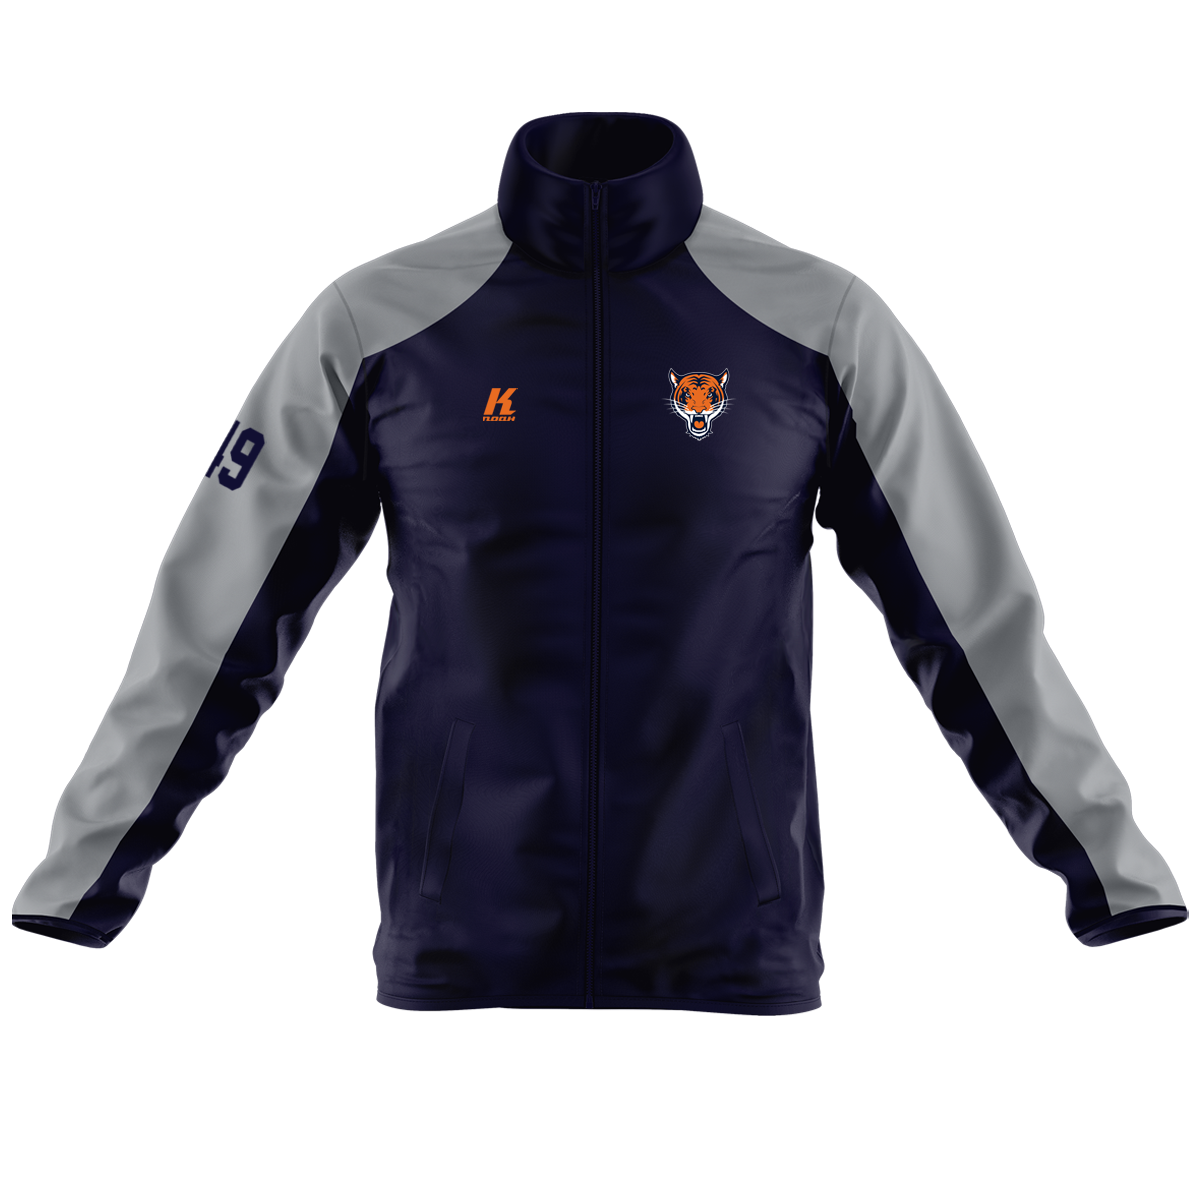 Tigers PRO Tracksuit Top Windstop with Playernumber or Initials